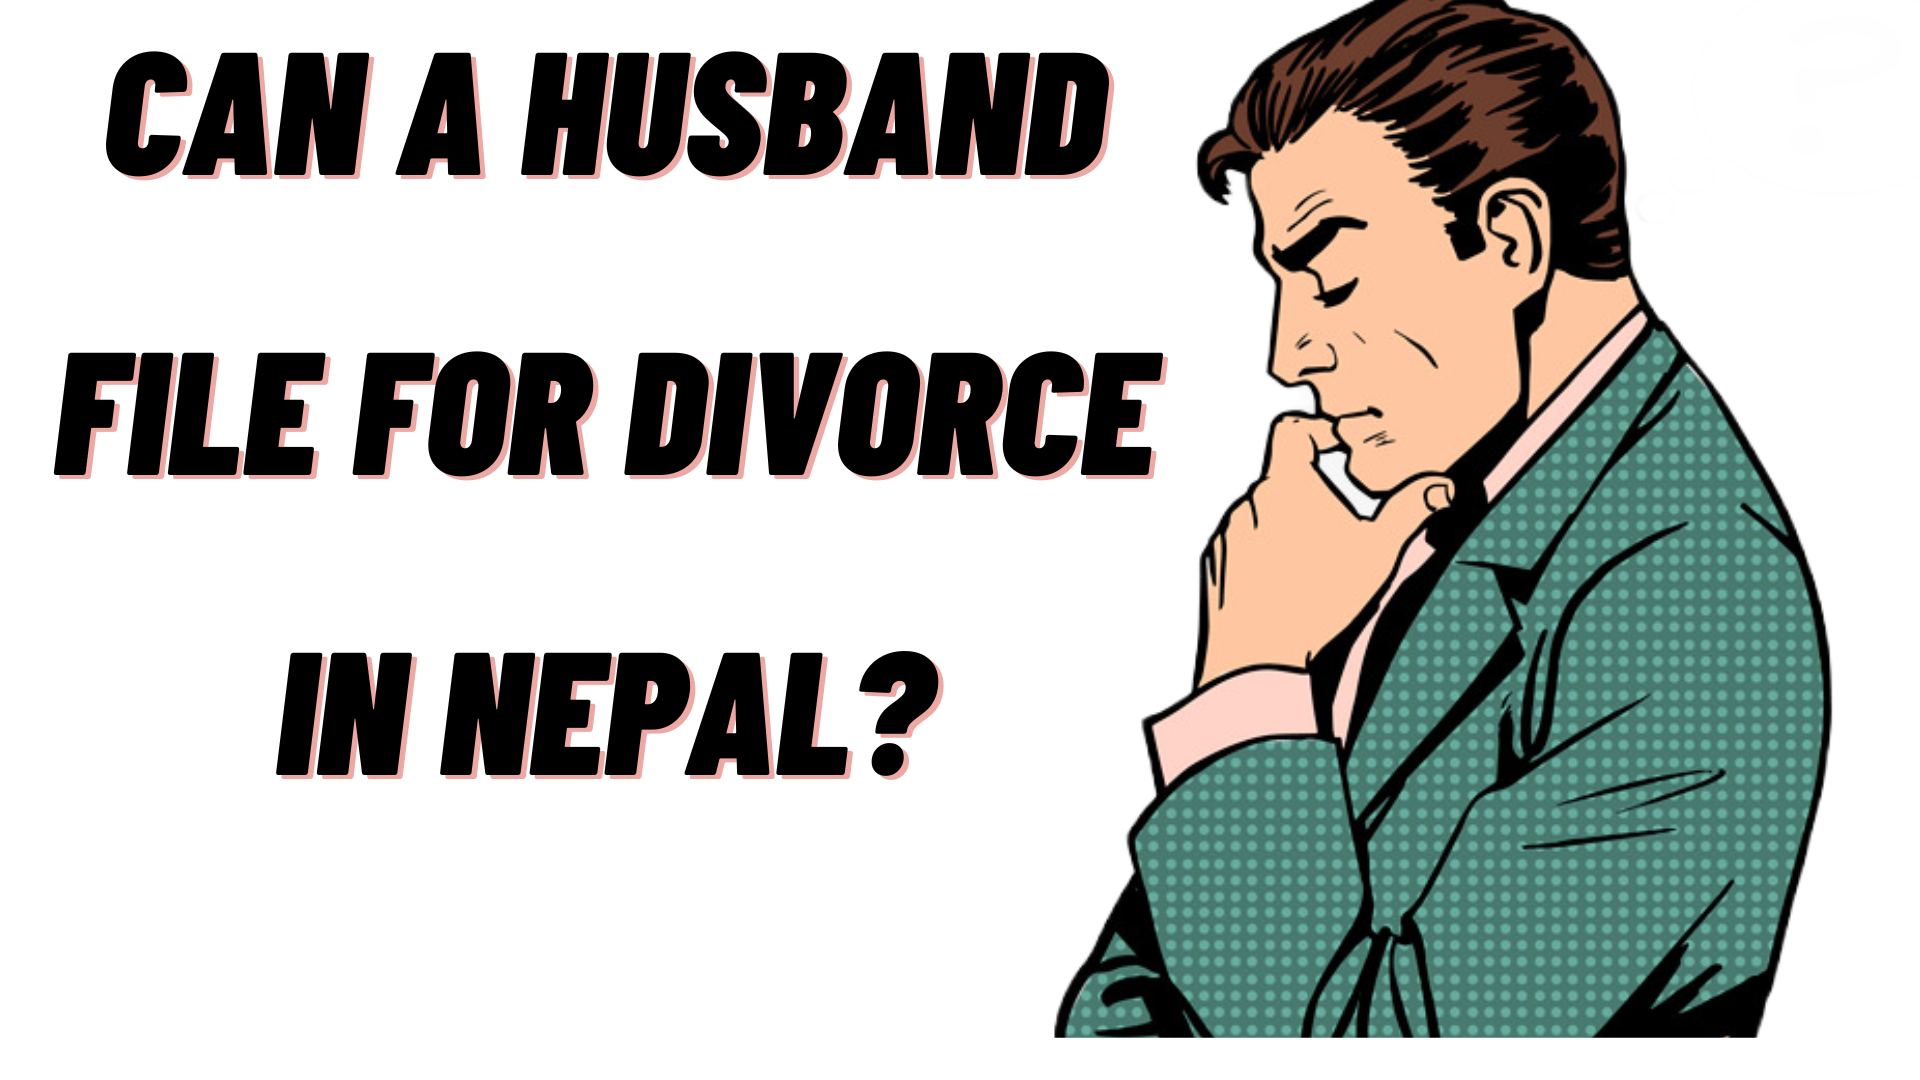 can-a-husband-file-for-a-divorce-in-Nepal